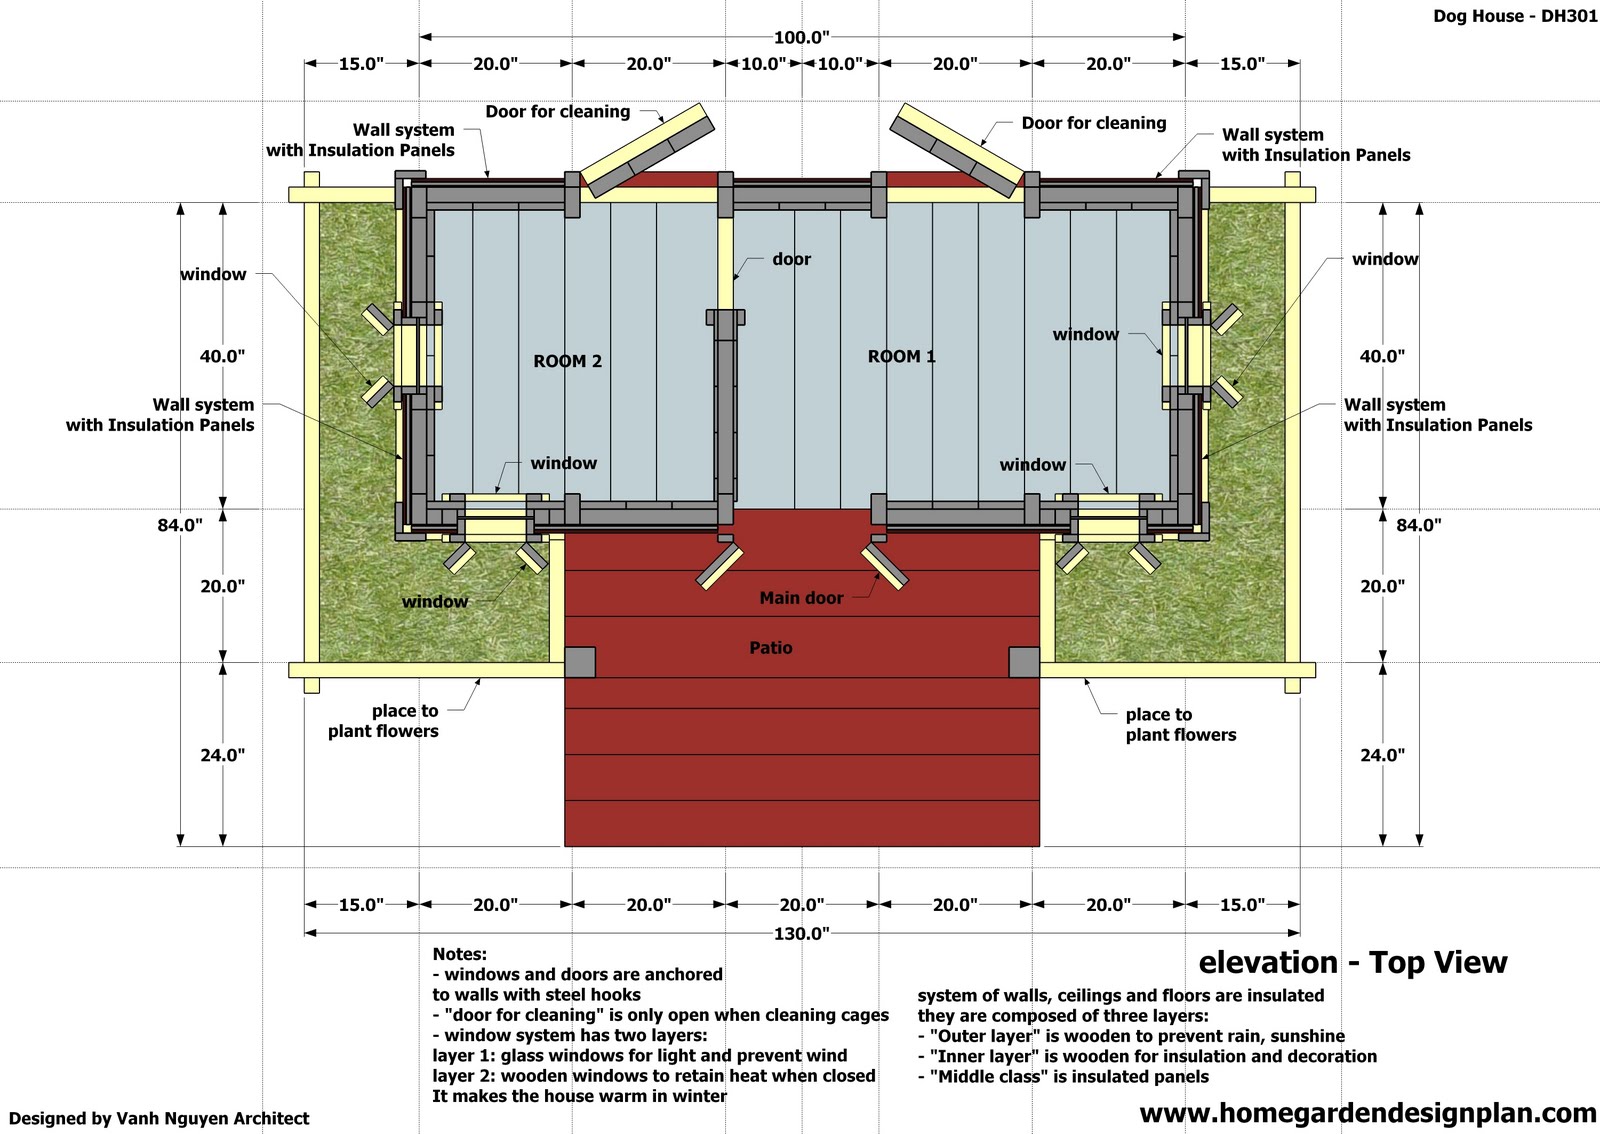  Dog House Plans likewise Insulated Dog House. on dog house plans for